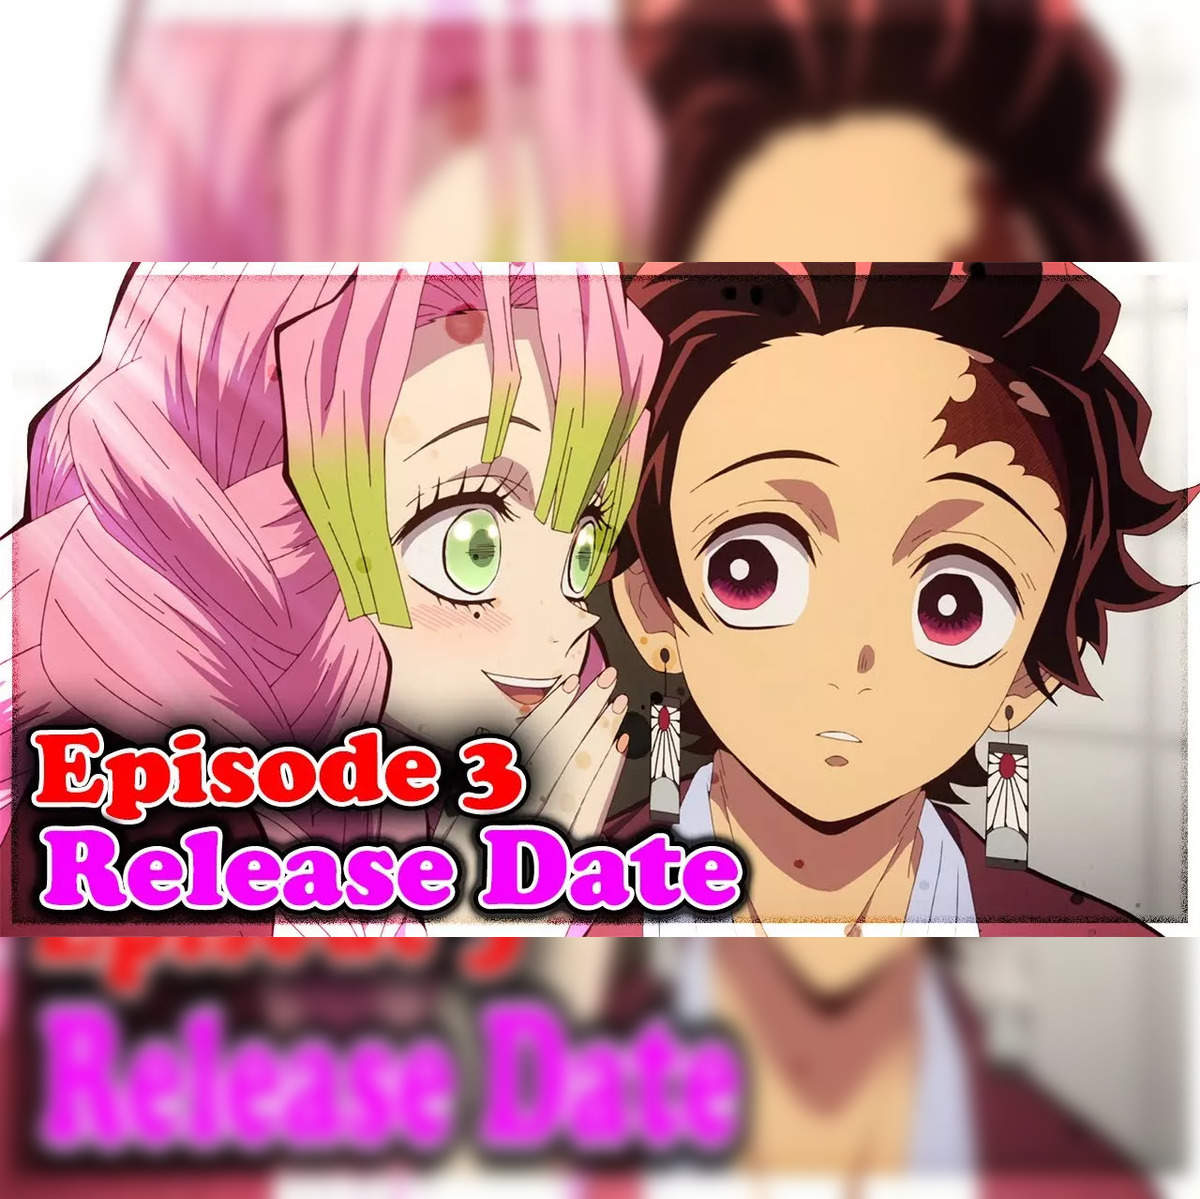 Demon Slayer Season 3 Episode 8 releases today - Release time